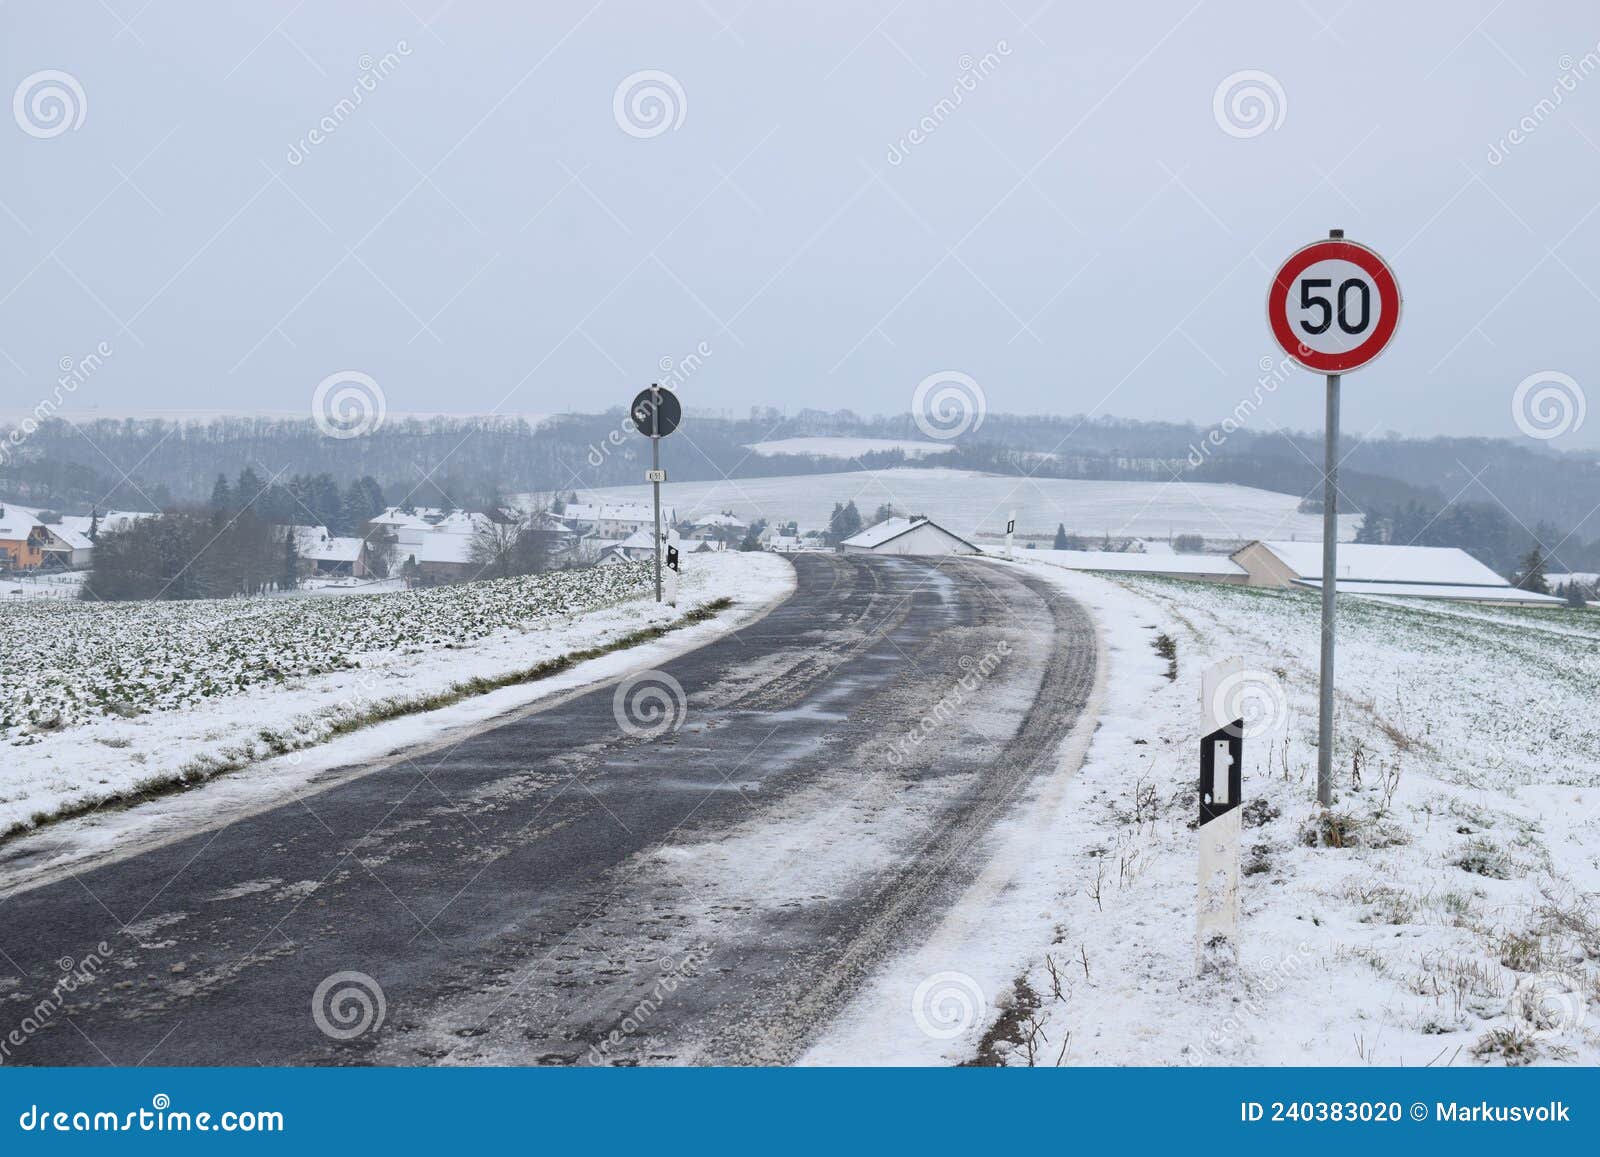 icy road into snowy village welling in the valley, speed limit 50 sign on the hill already